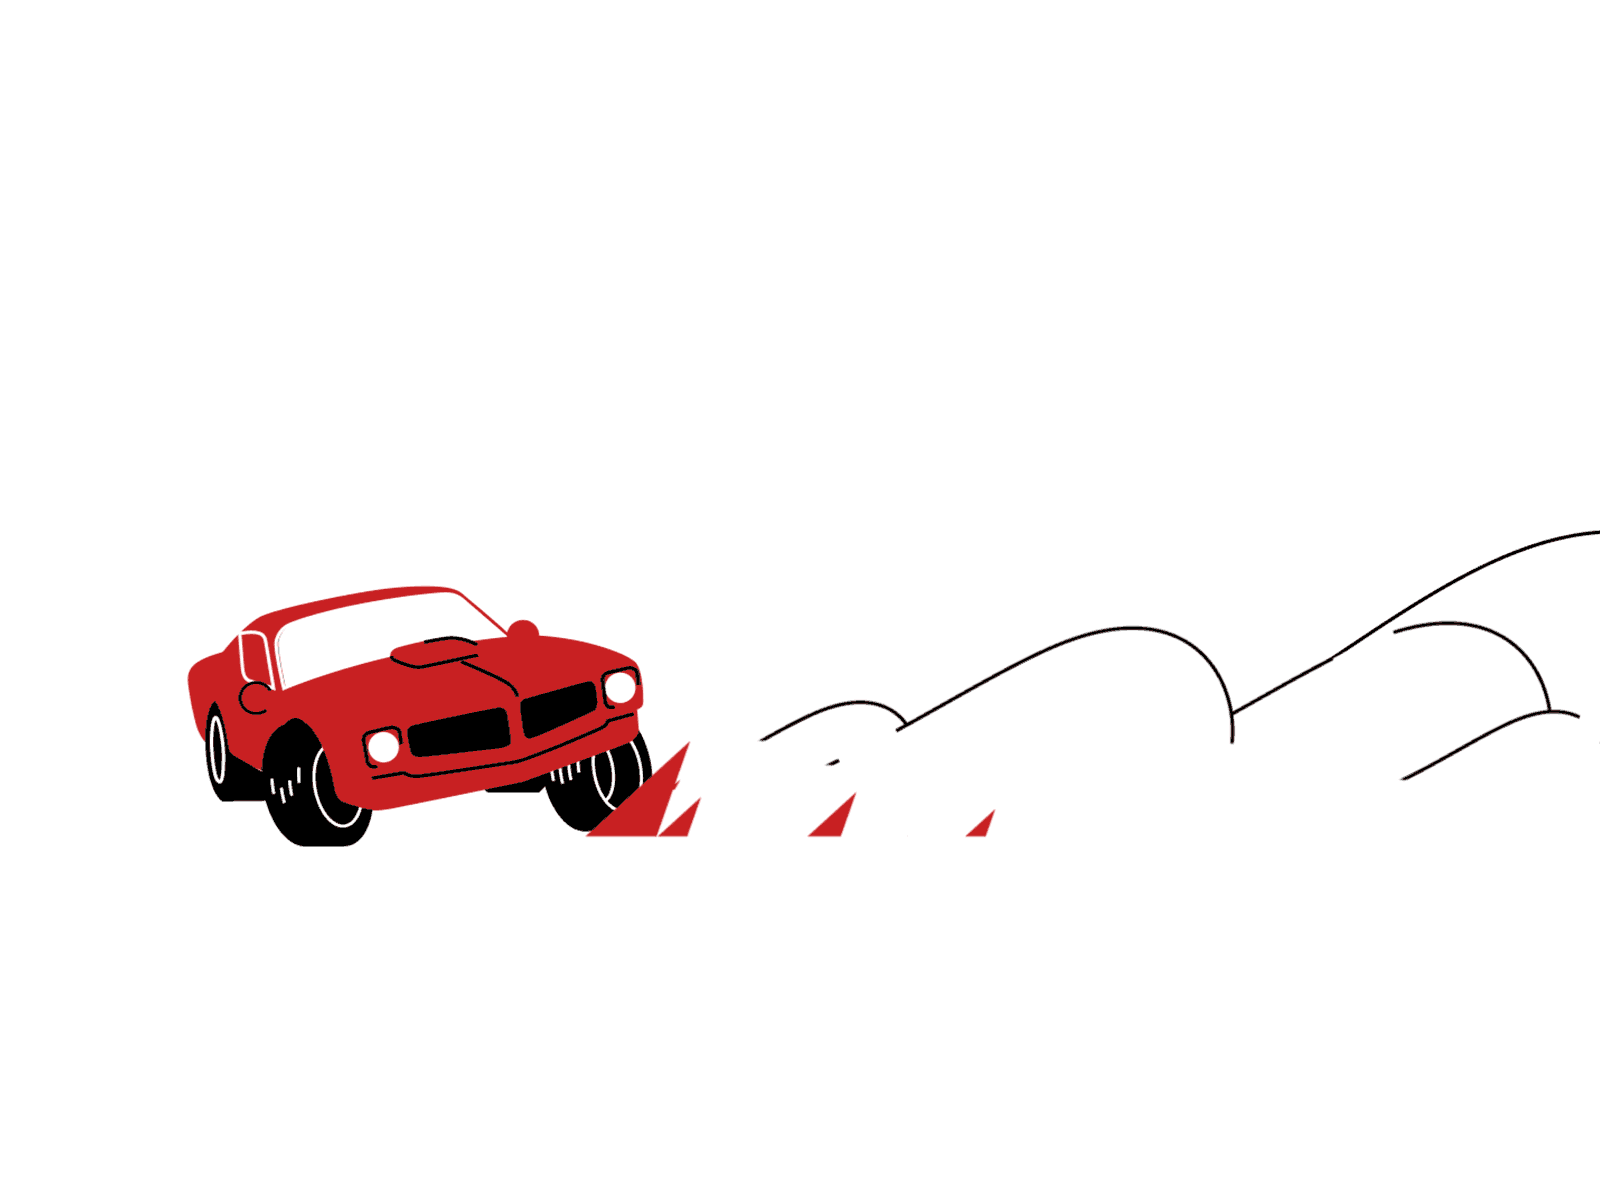 Rrrawr! ae after effect animation burnout cel classic donuts drift firebird frame by frame mograph motion muscle car